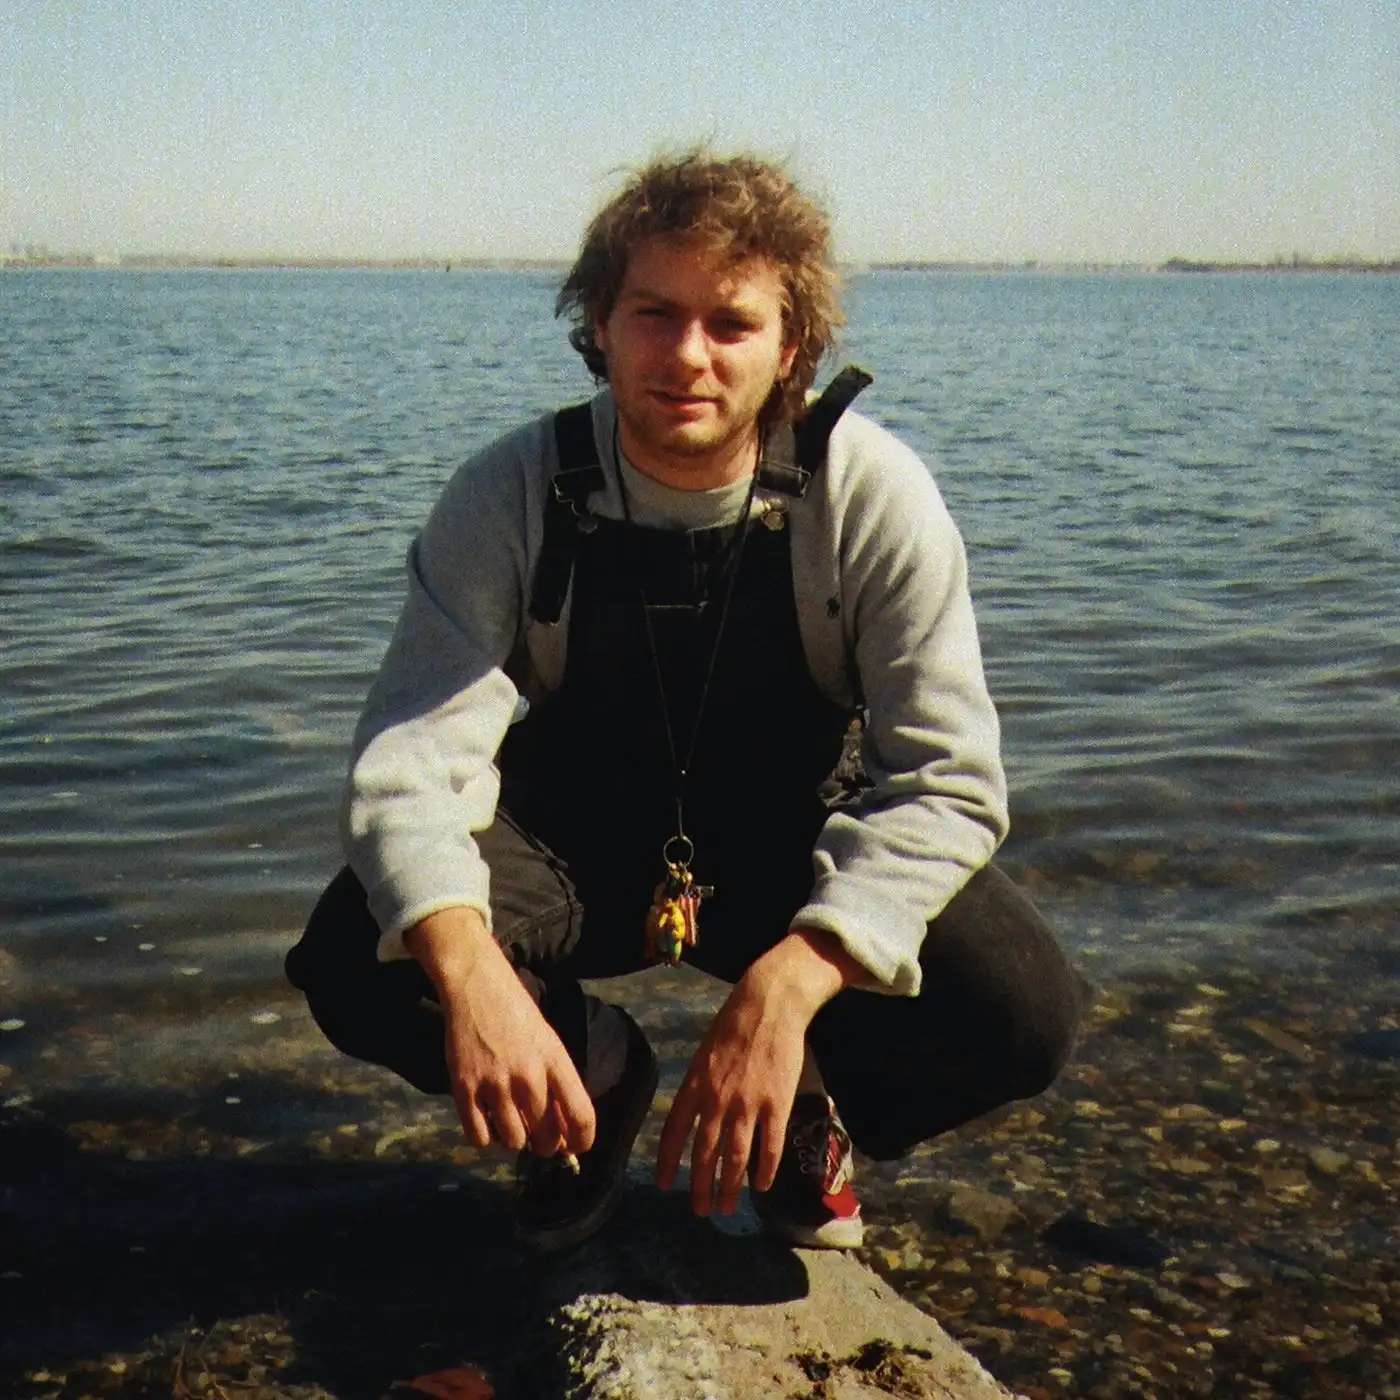 MAC DEMARCO / ANOTHER ONE